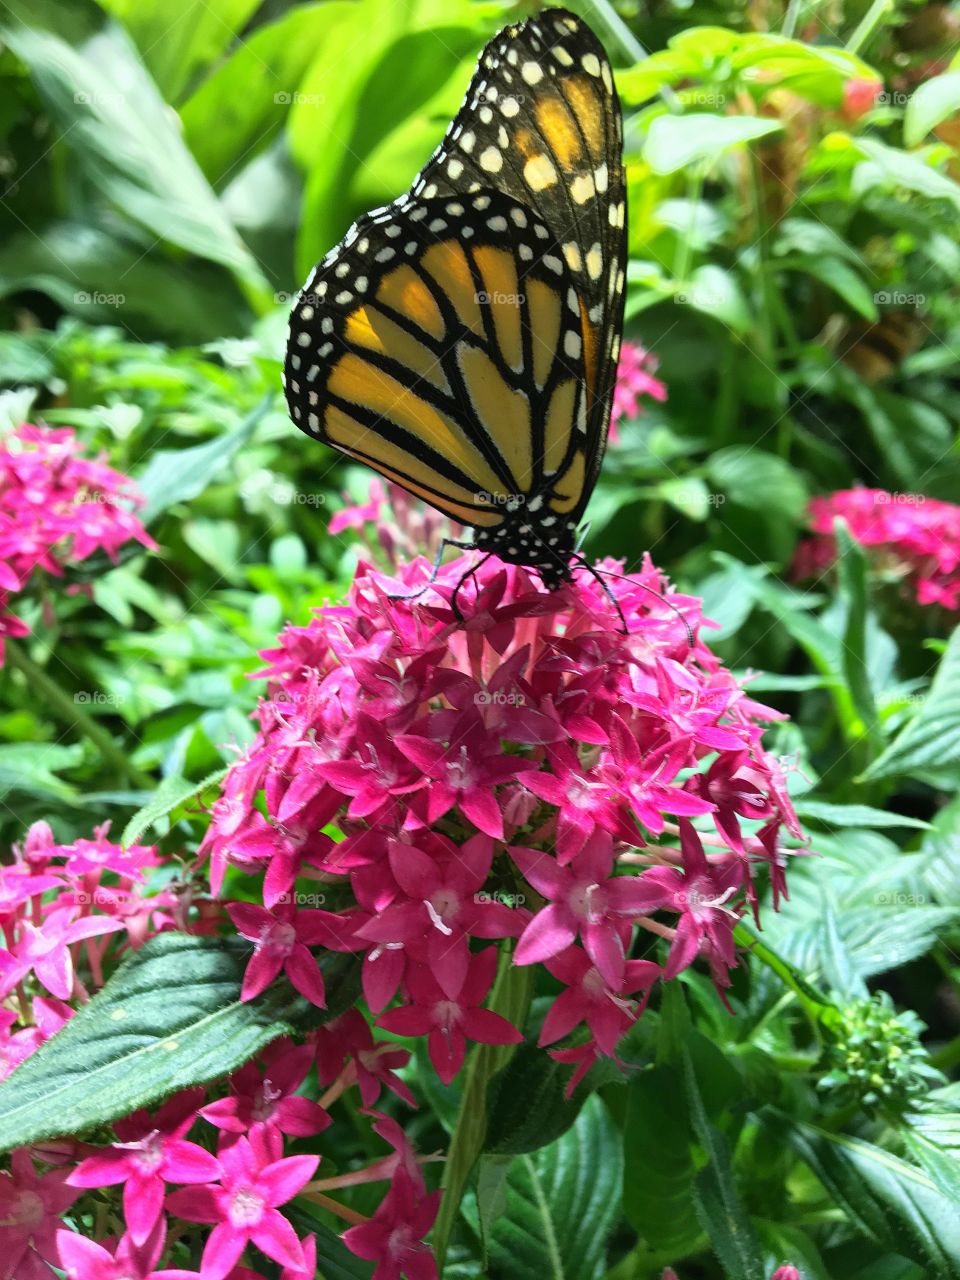 Monarch butterfly on a bright pink flower